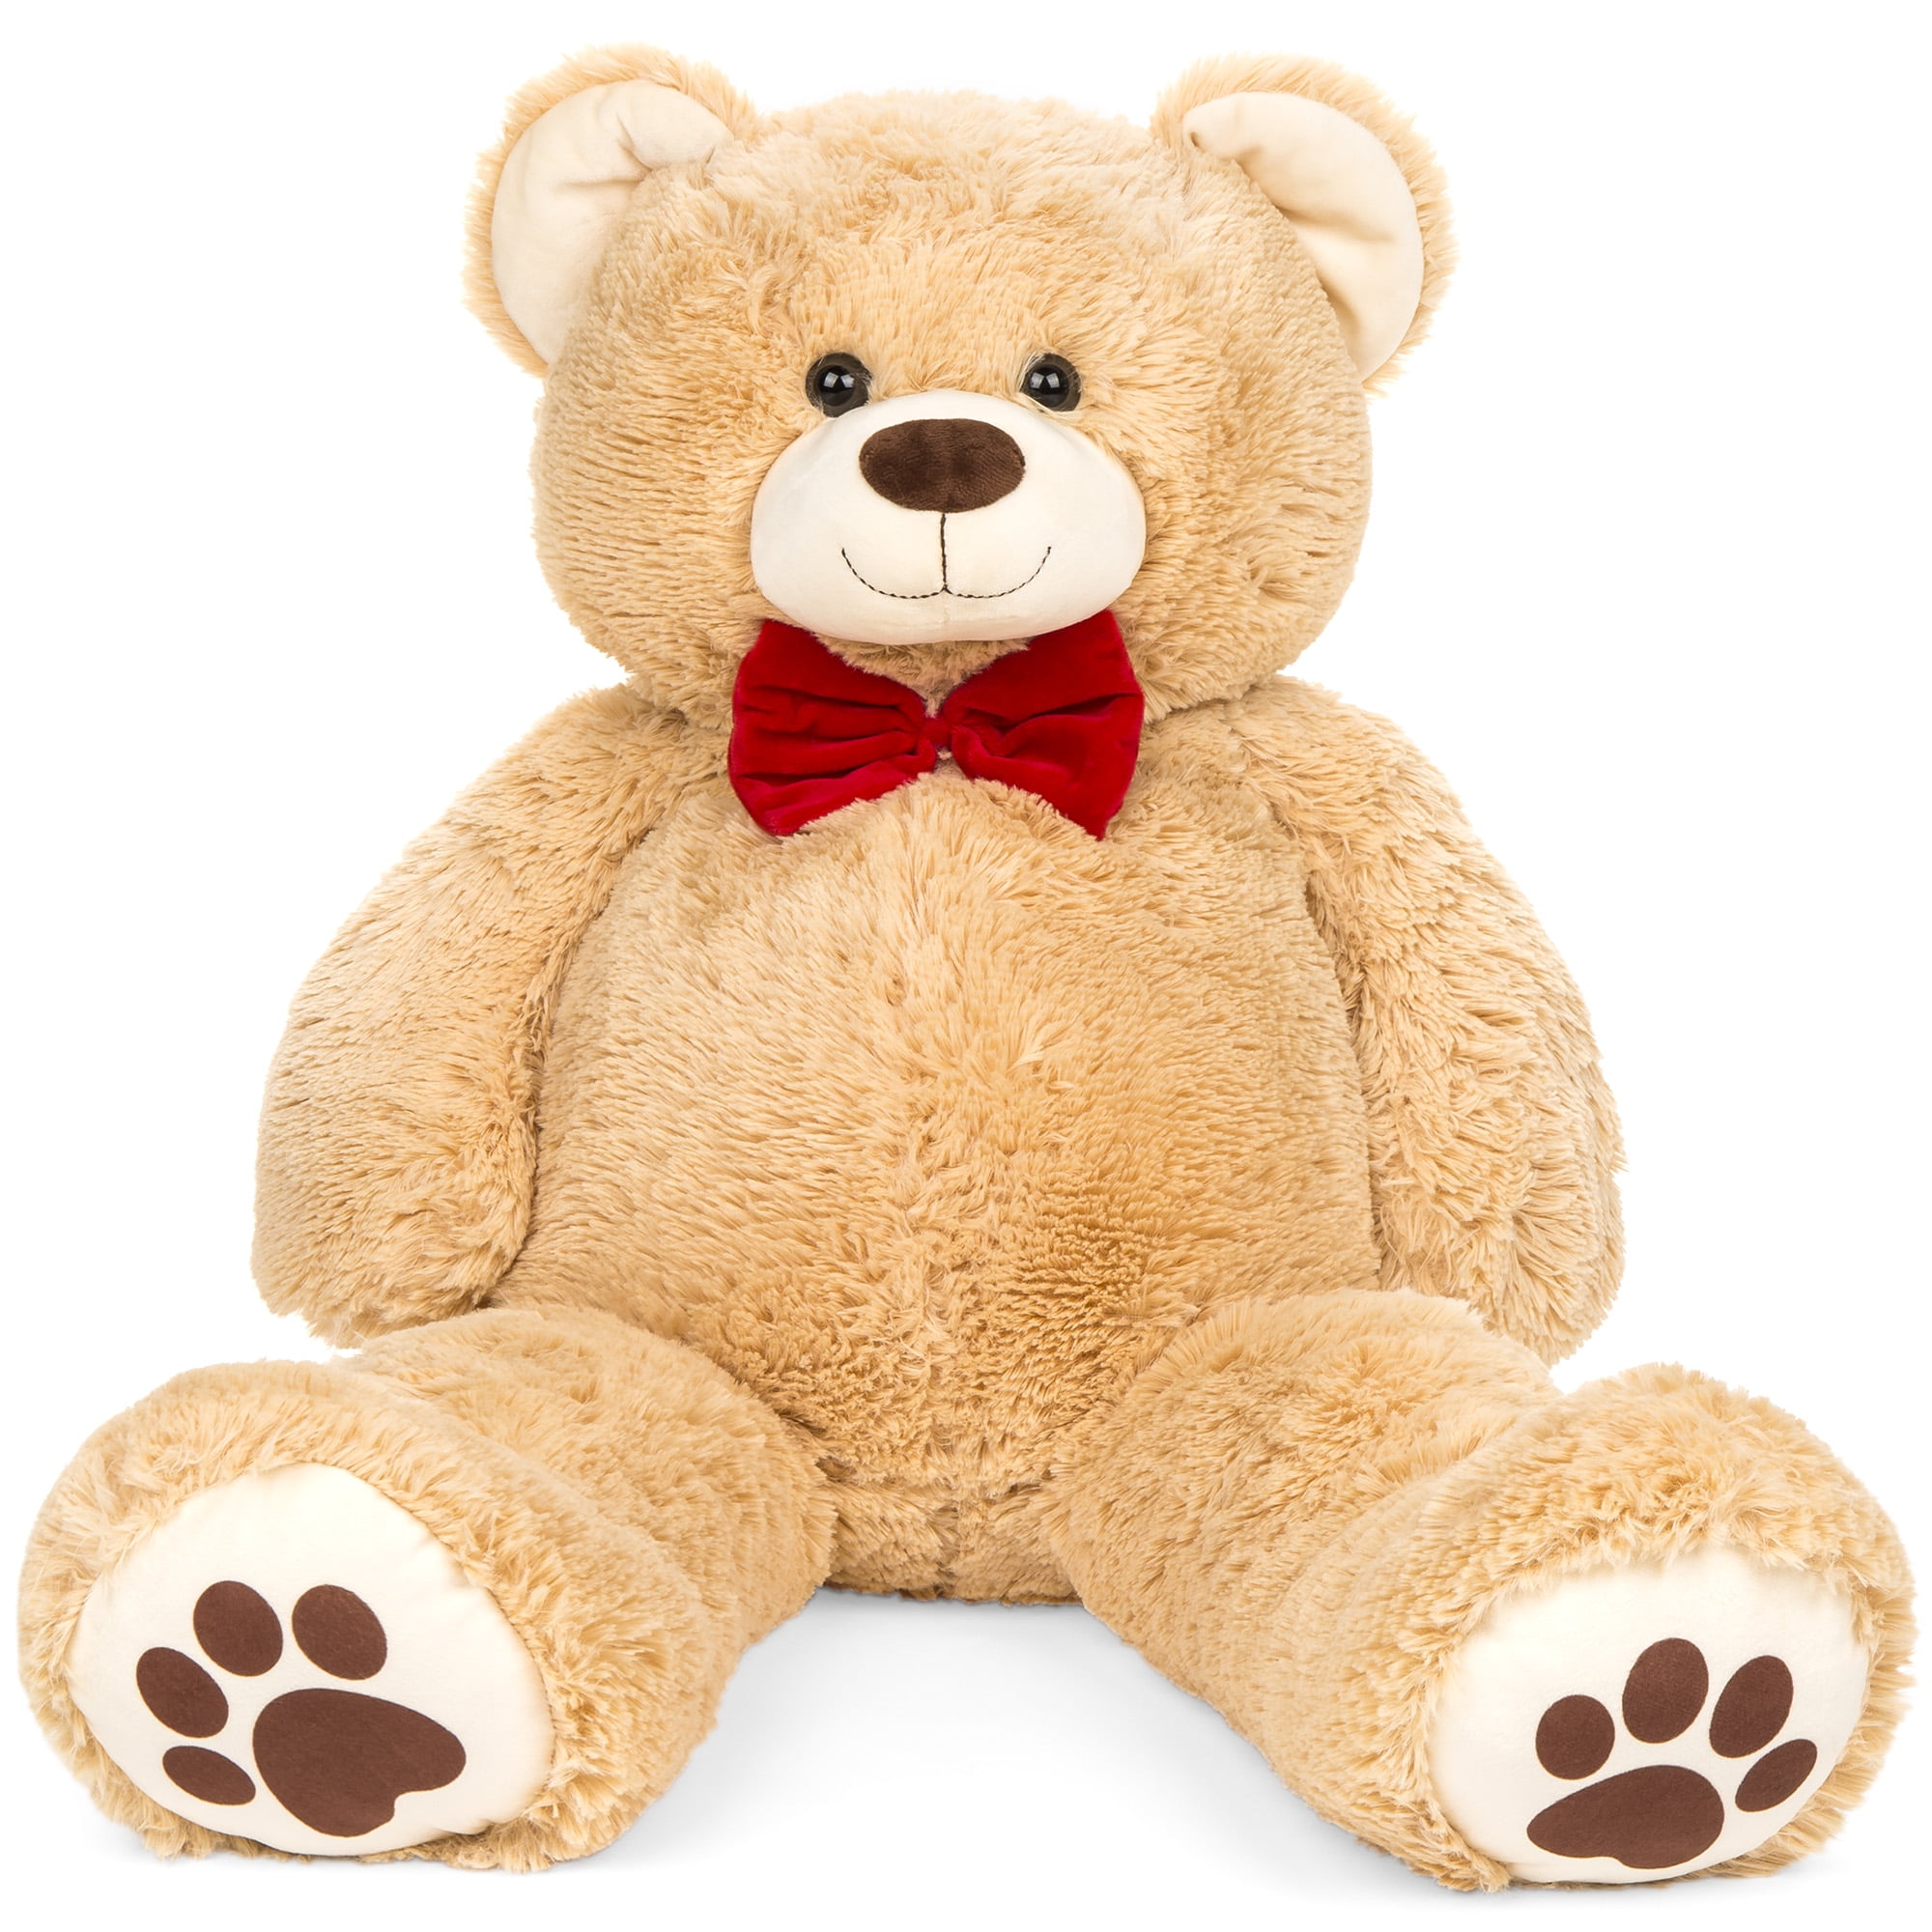 List 100+ Images brown teddy bear with red bow tie Sharp